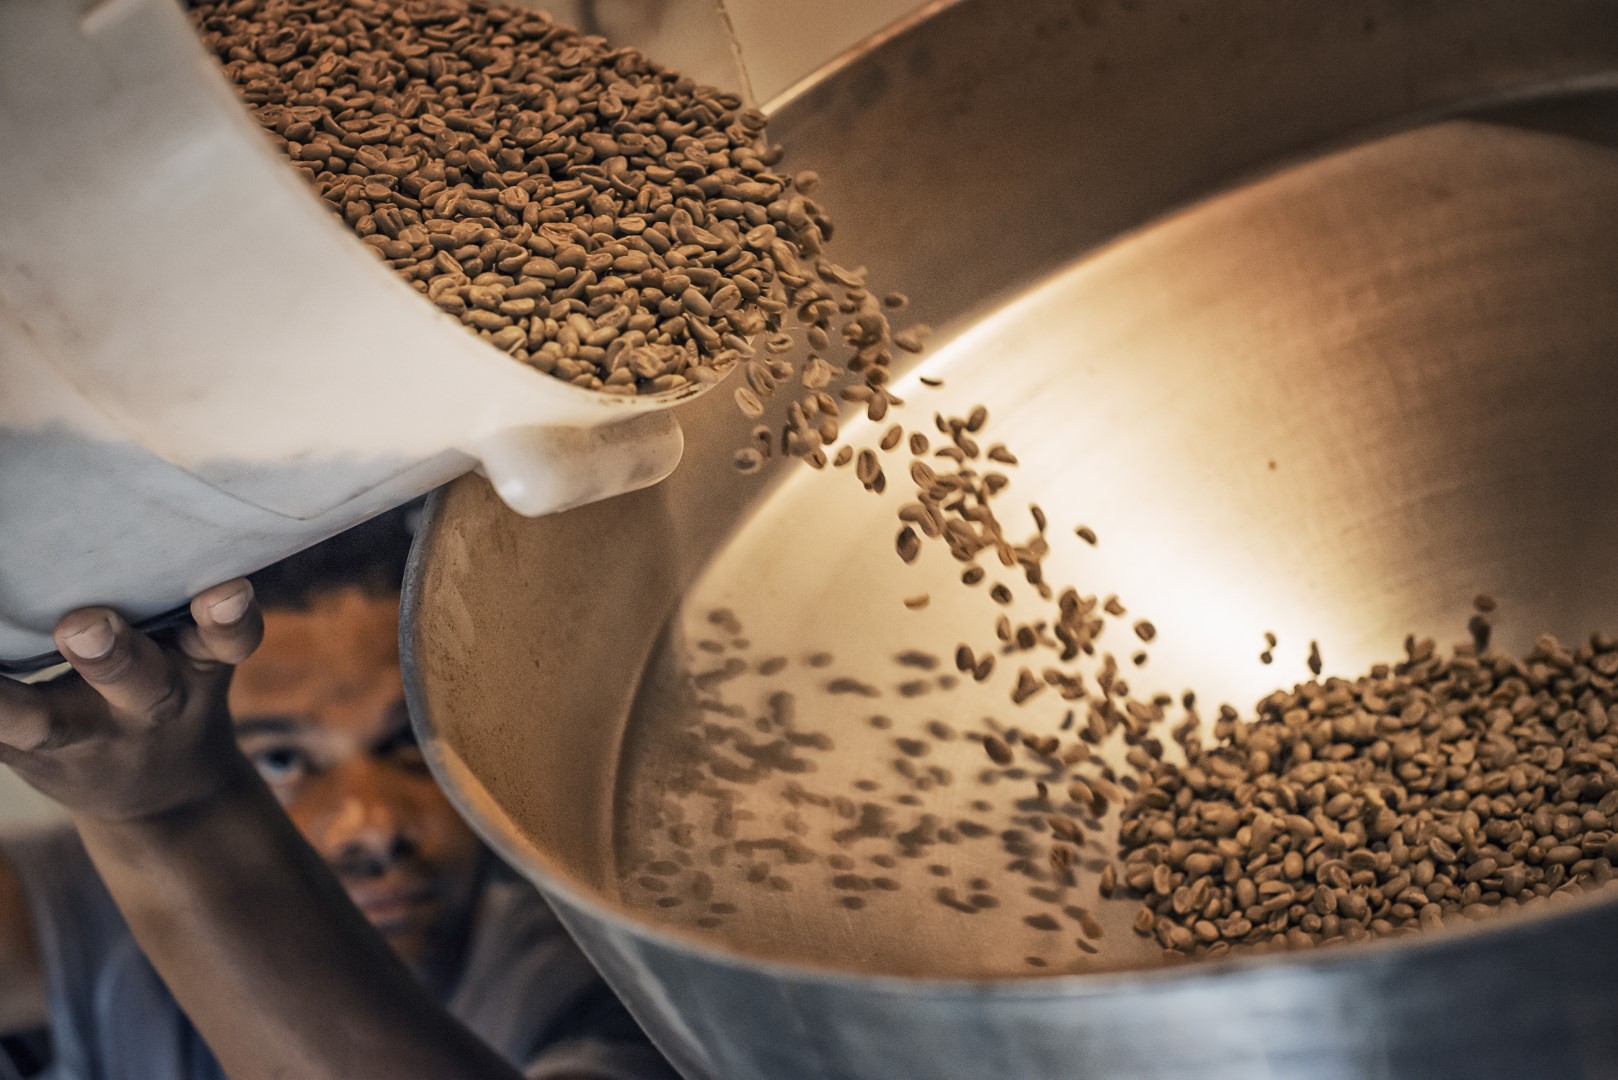 Processing coffee beans for roasting and blending at a farm which imports coffee beans.